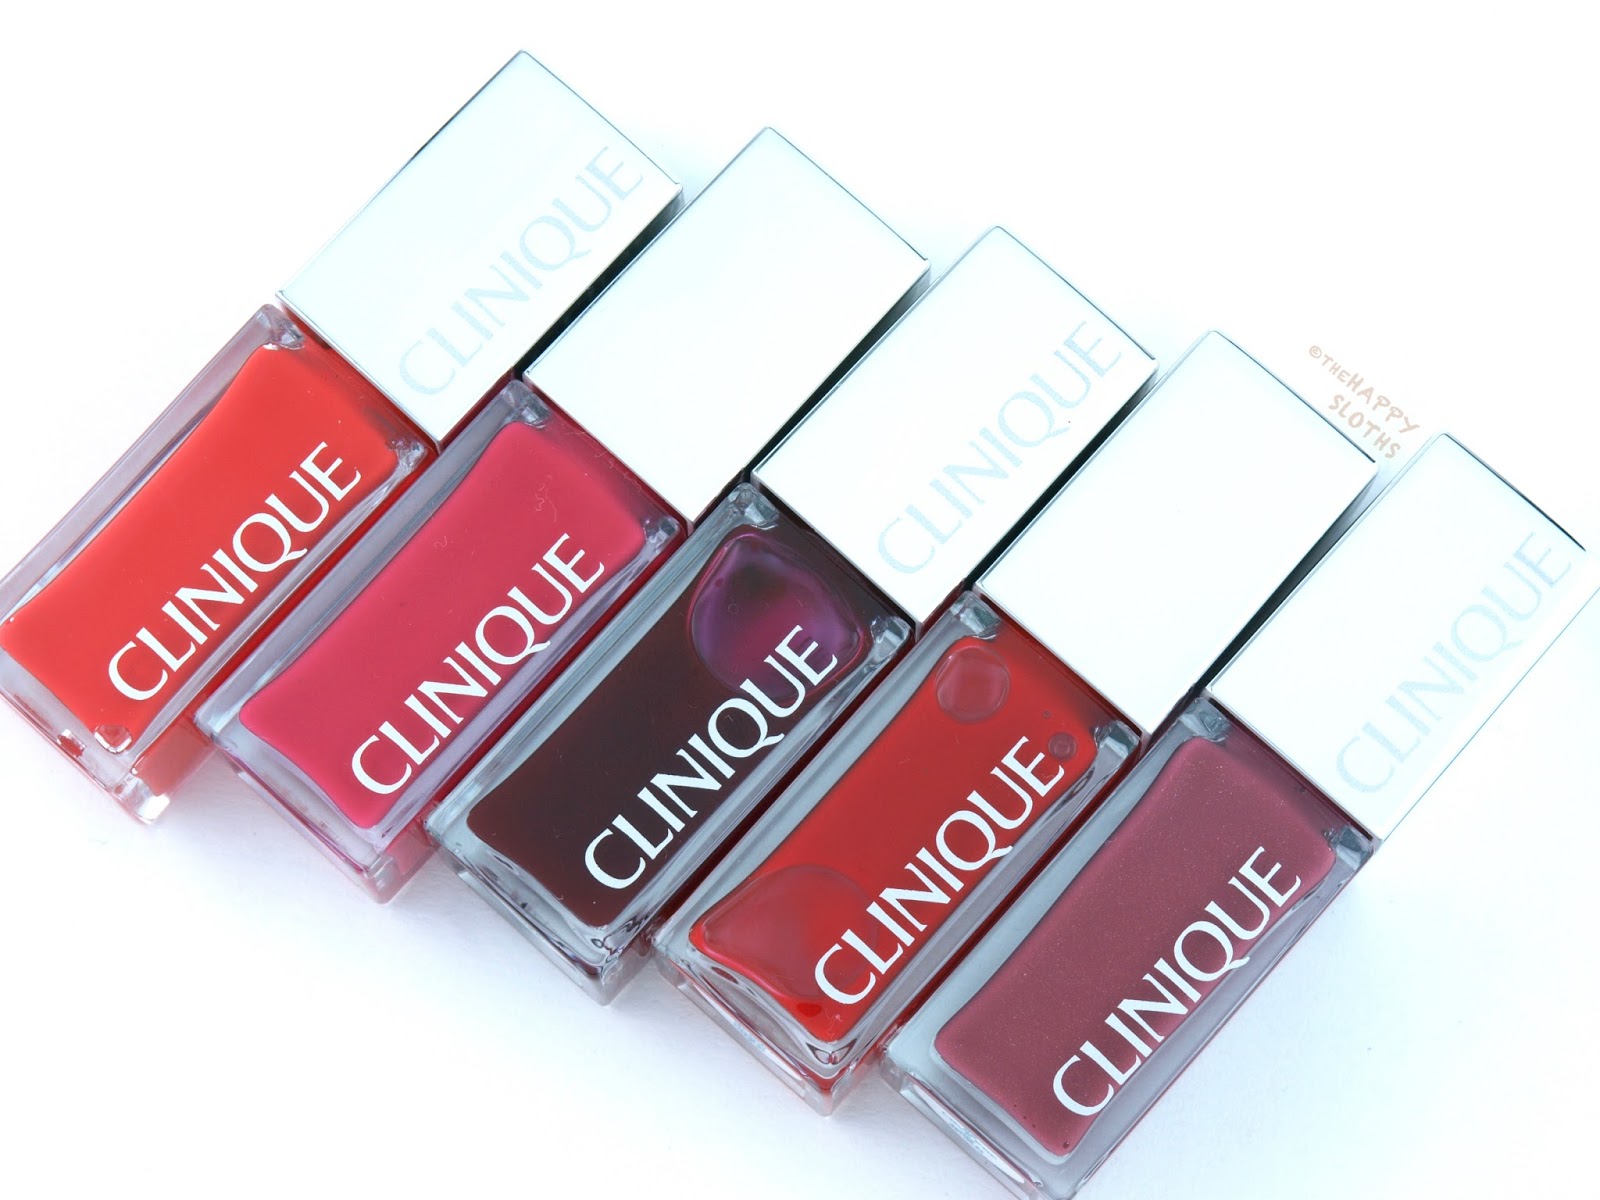 Clinique Pop Lacquer Lip Color Primer and Oil Lip & Cheek Glow: Review and Swatches | The Happy Sloths: Beauty, Makeup, and Skincare Blog with Reviews and Swatches